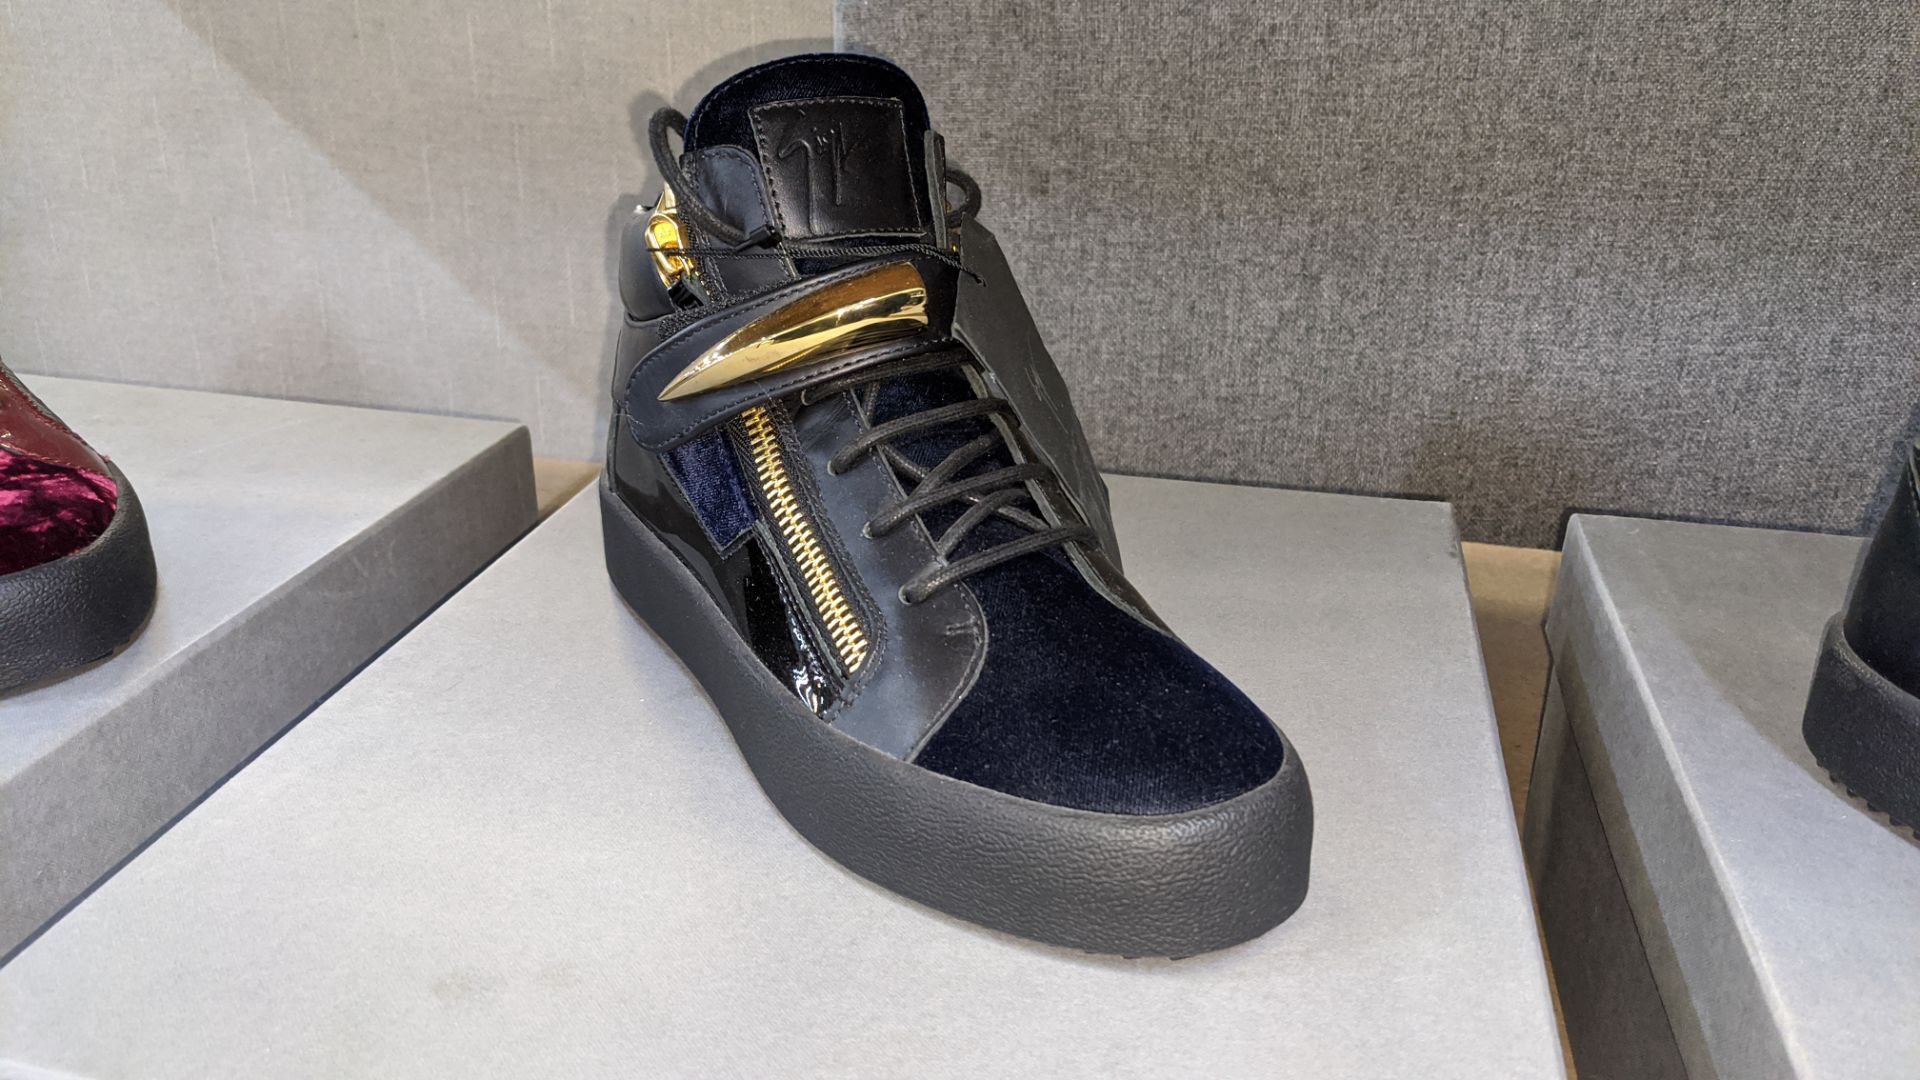 Pair of Giuseppe Zanotti Design trainers, product code RM7106 colour Navy size EU40/UK6, RRP £810 - Image 4 of 6